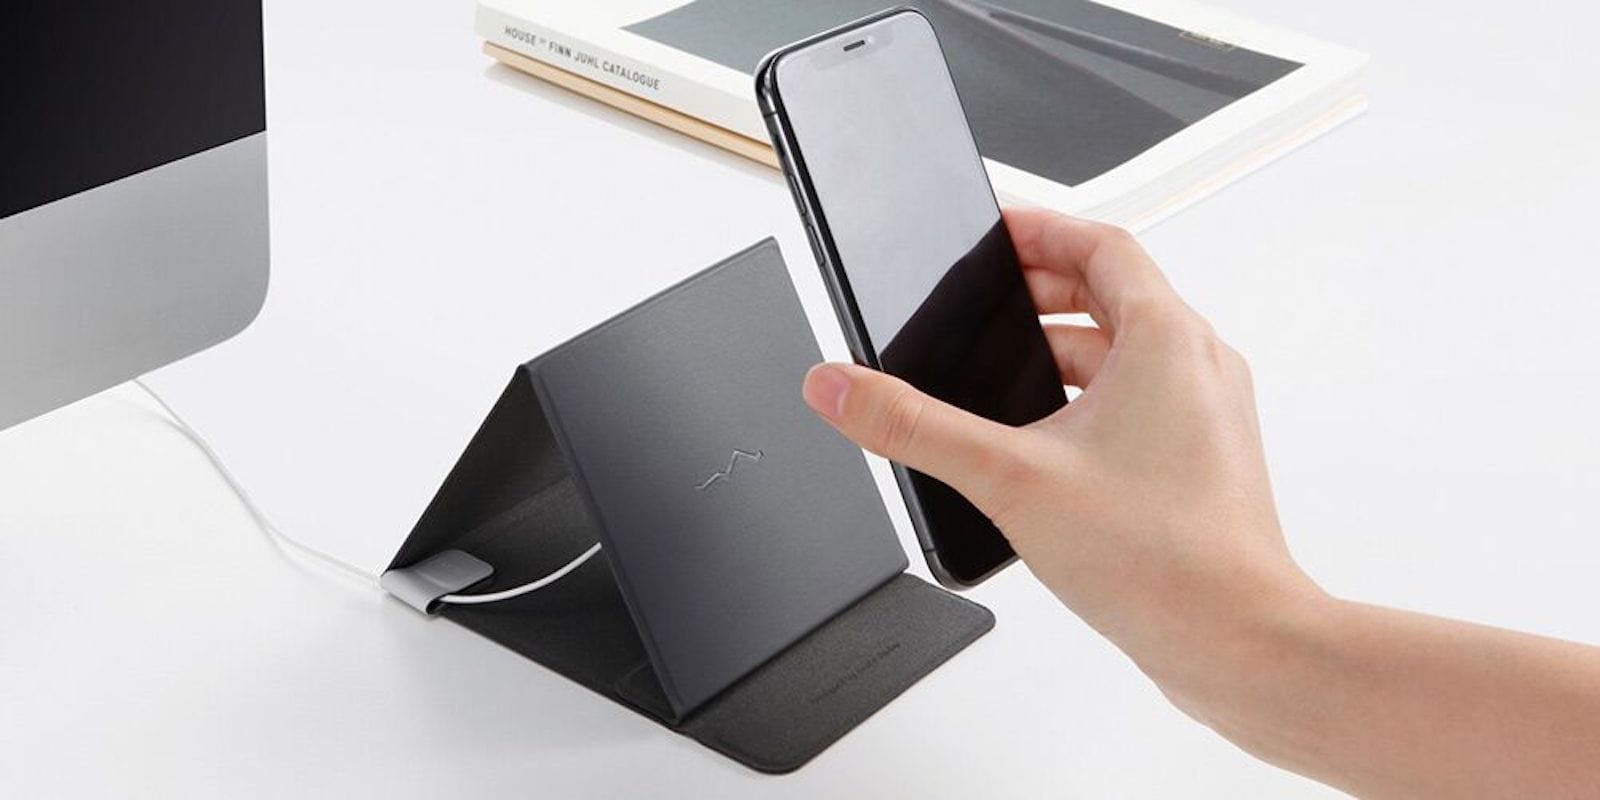 This wireless charger goes anywhere you do, with 3 different positions so you can keep using your device while it charges.